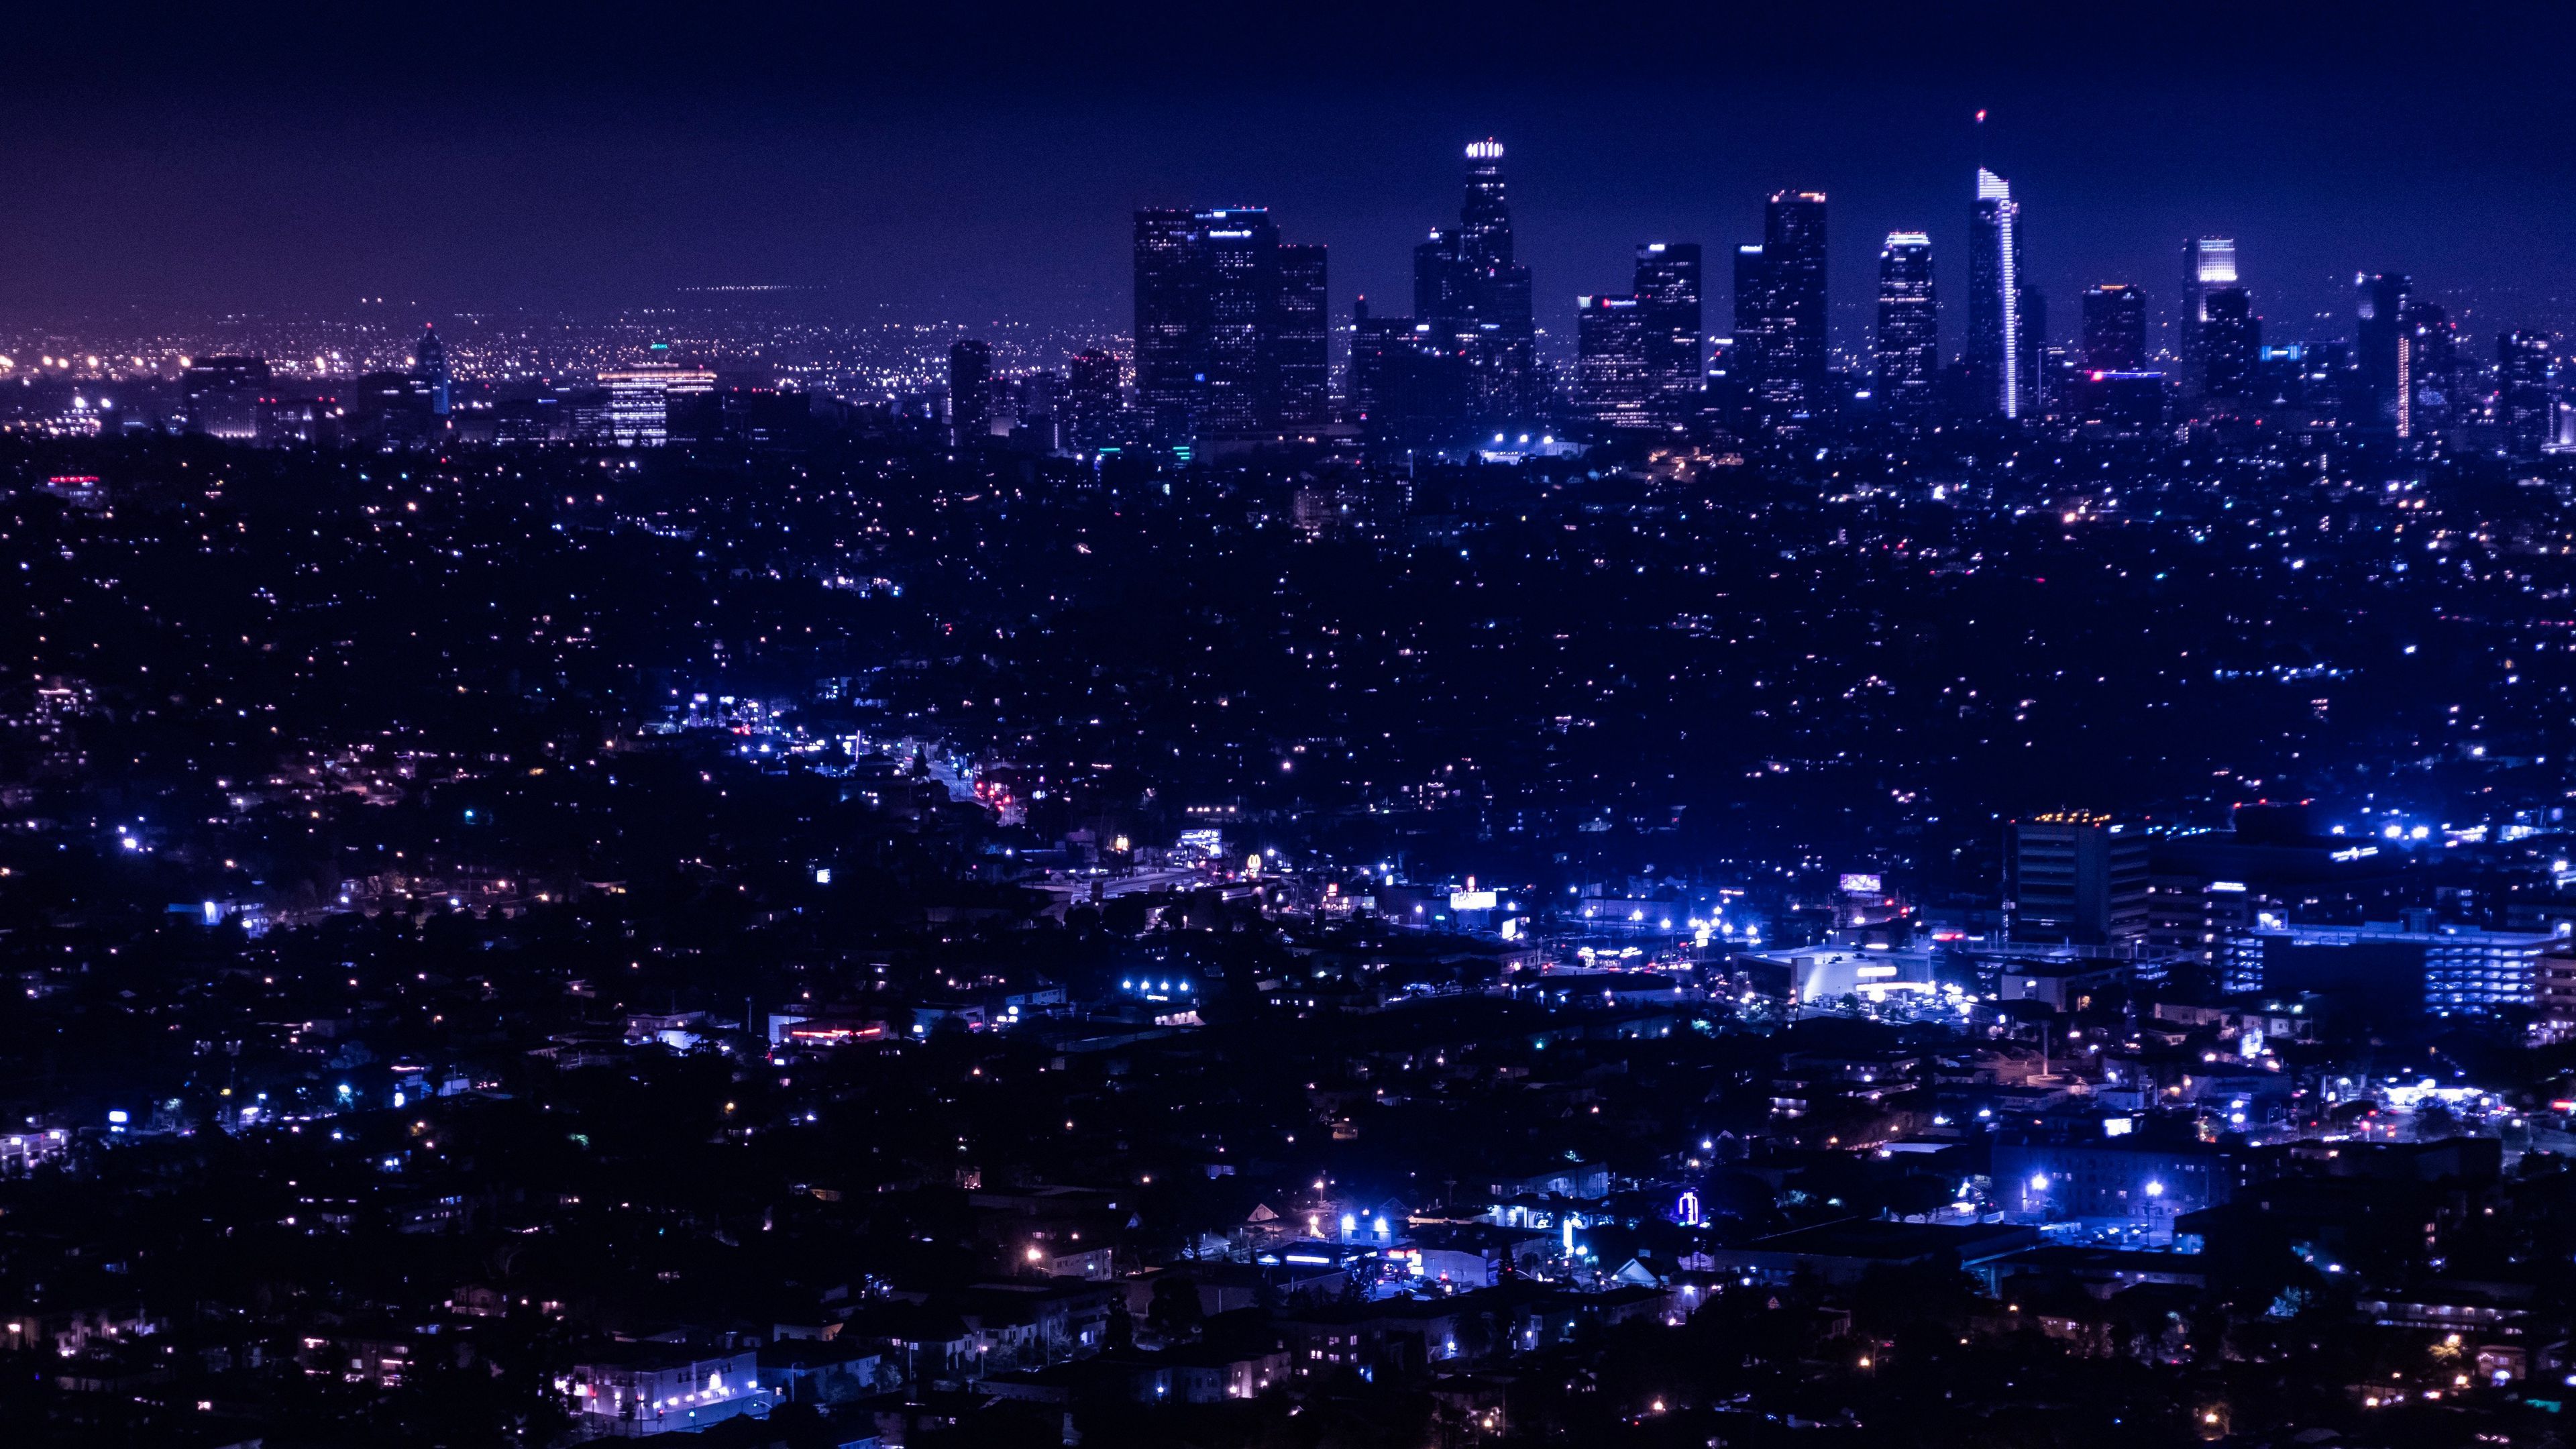 Download wallpaper 3840x2160 night city, city lights, overview, aerial view 4k uhd 16:9 HD background